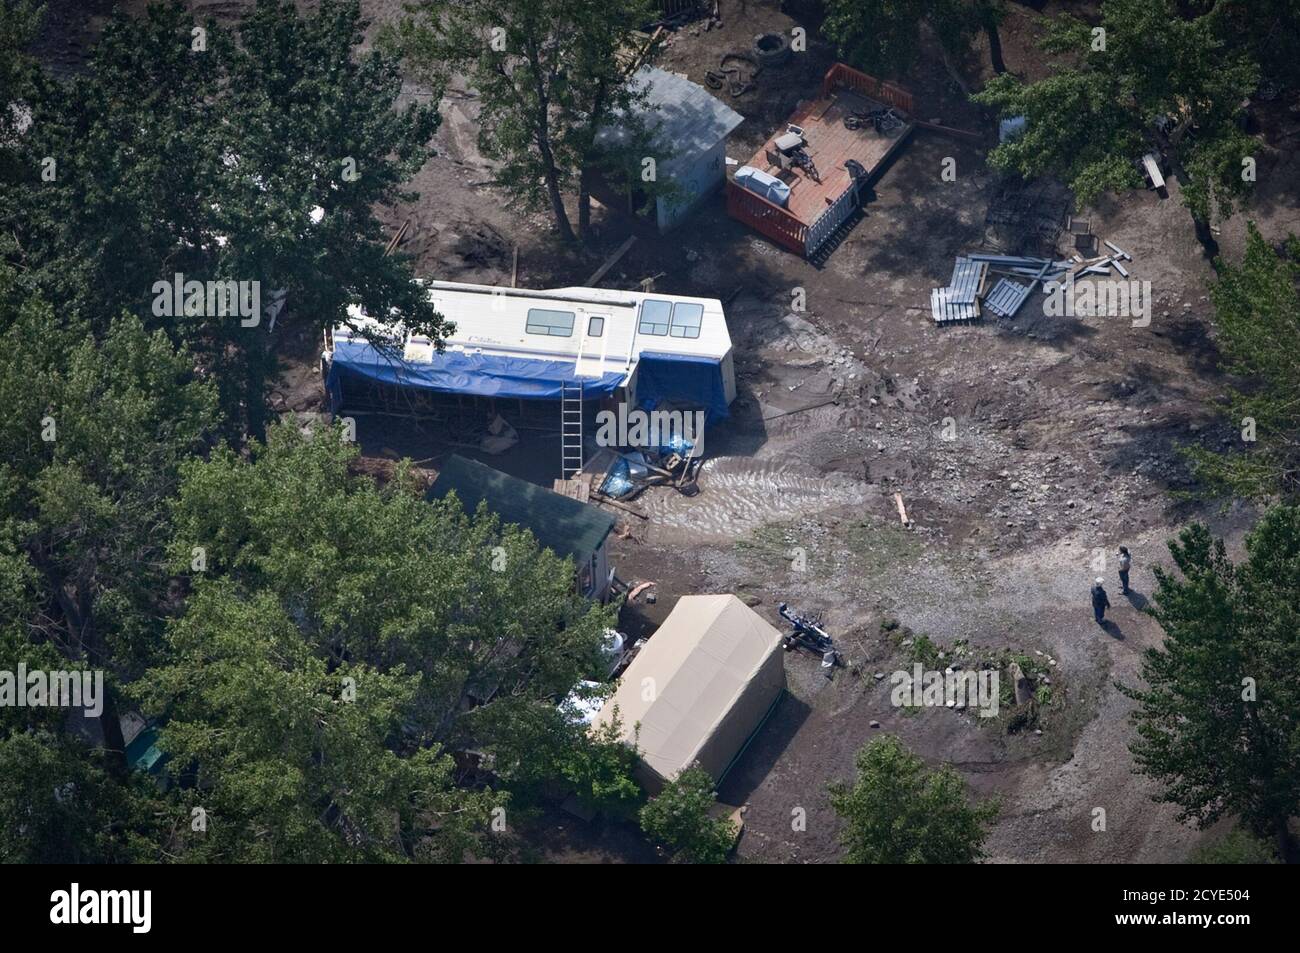 A mobile home lies on its side after flood waters swept through a trailer park in Okotoks, Alberta, south of Calgary June 23, 2013. A couple of trailers were swept downstream when fast-rushing waters from the Sheep River entered the park. Power outages in the Canadian oil capital of Calgary could last for weeks or even months, city authorities said on Sunday, as record breaking flood waters moved downstream to threaten smaller communities in southeastern Alberta.     REUTERS/Andy Clark   (CANADA - Tags: DISASTER ENVIRONMENT) Stock Photo